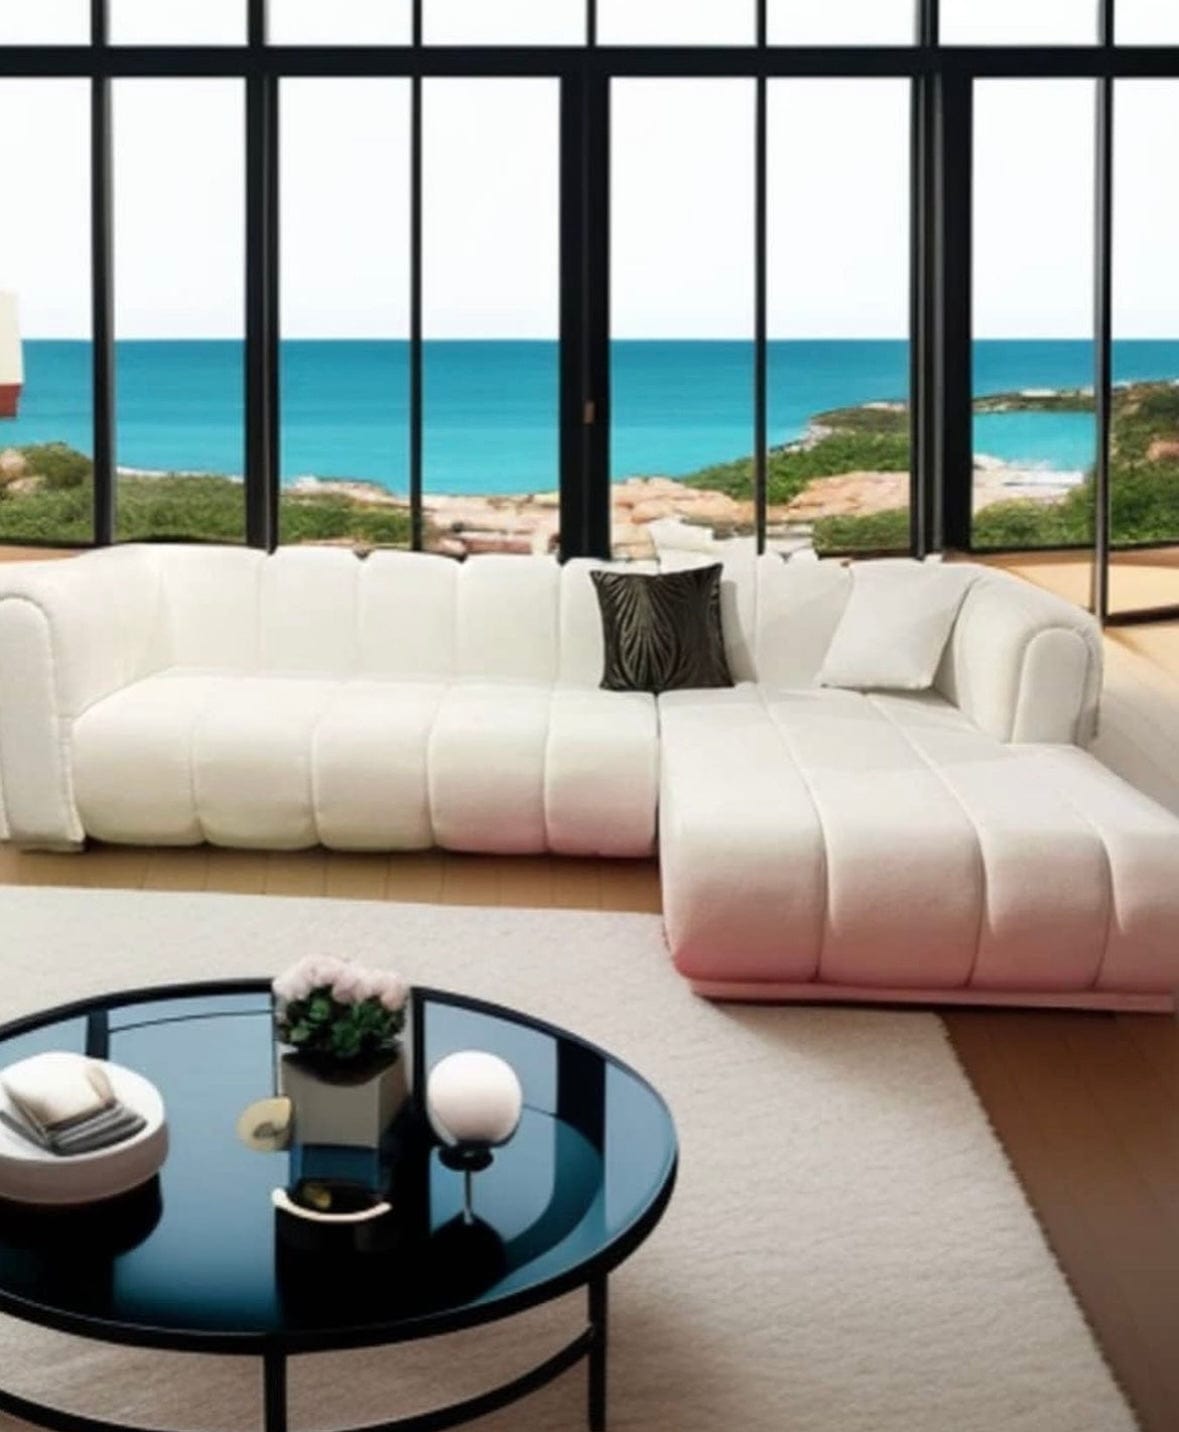 Home Atelier Zuric Sectional Sofa